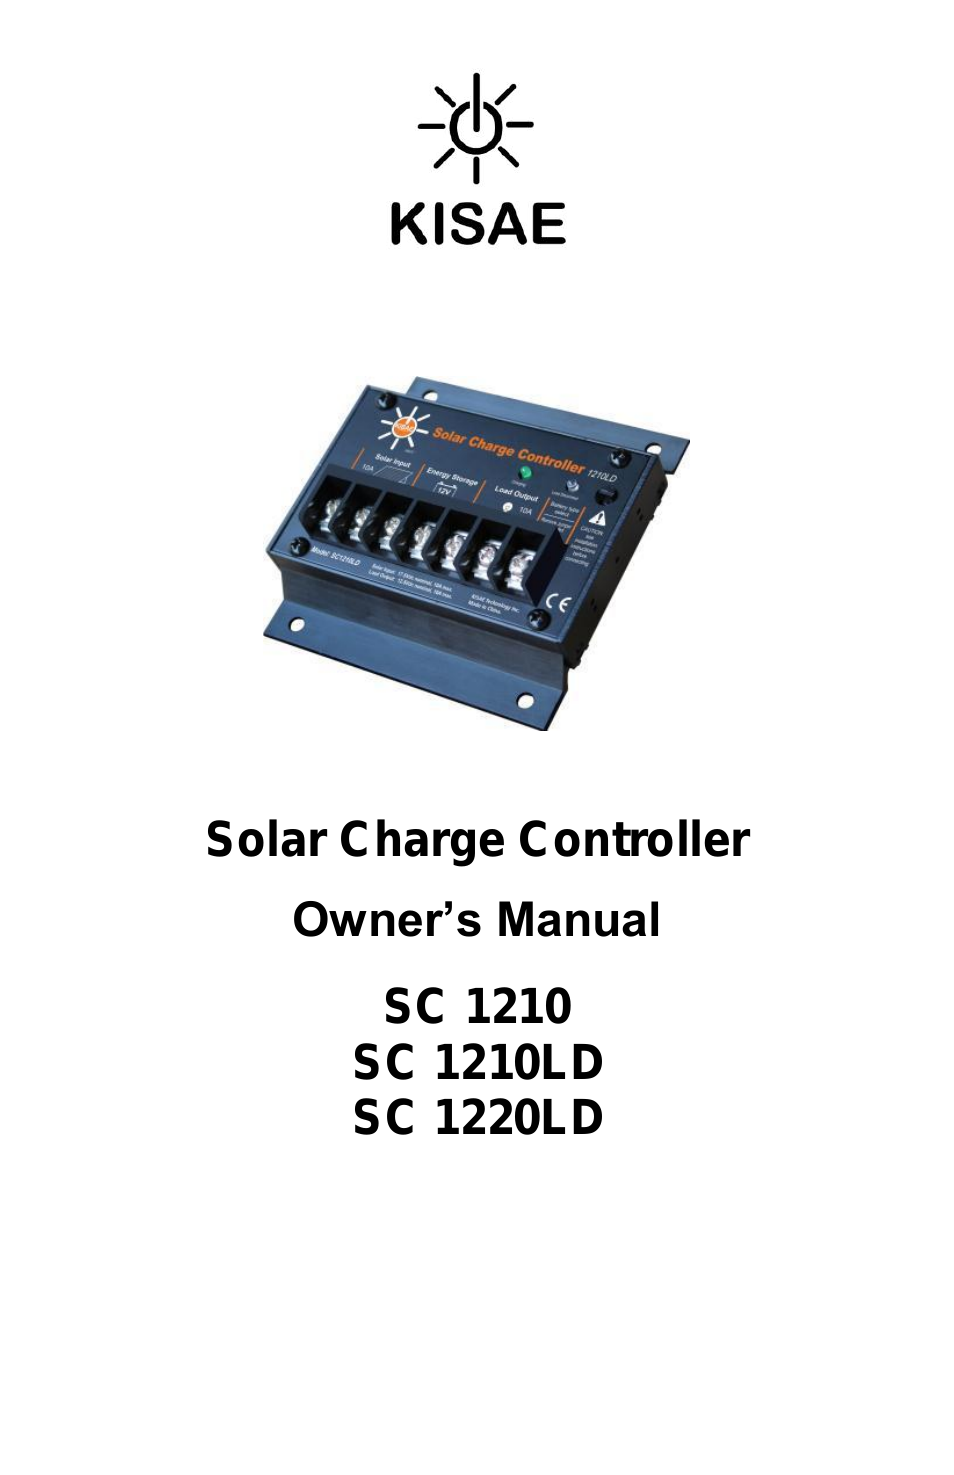 SC 1210 Solar Charge Controller